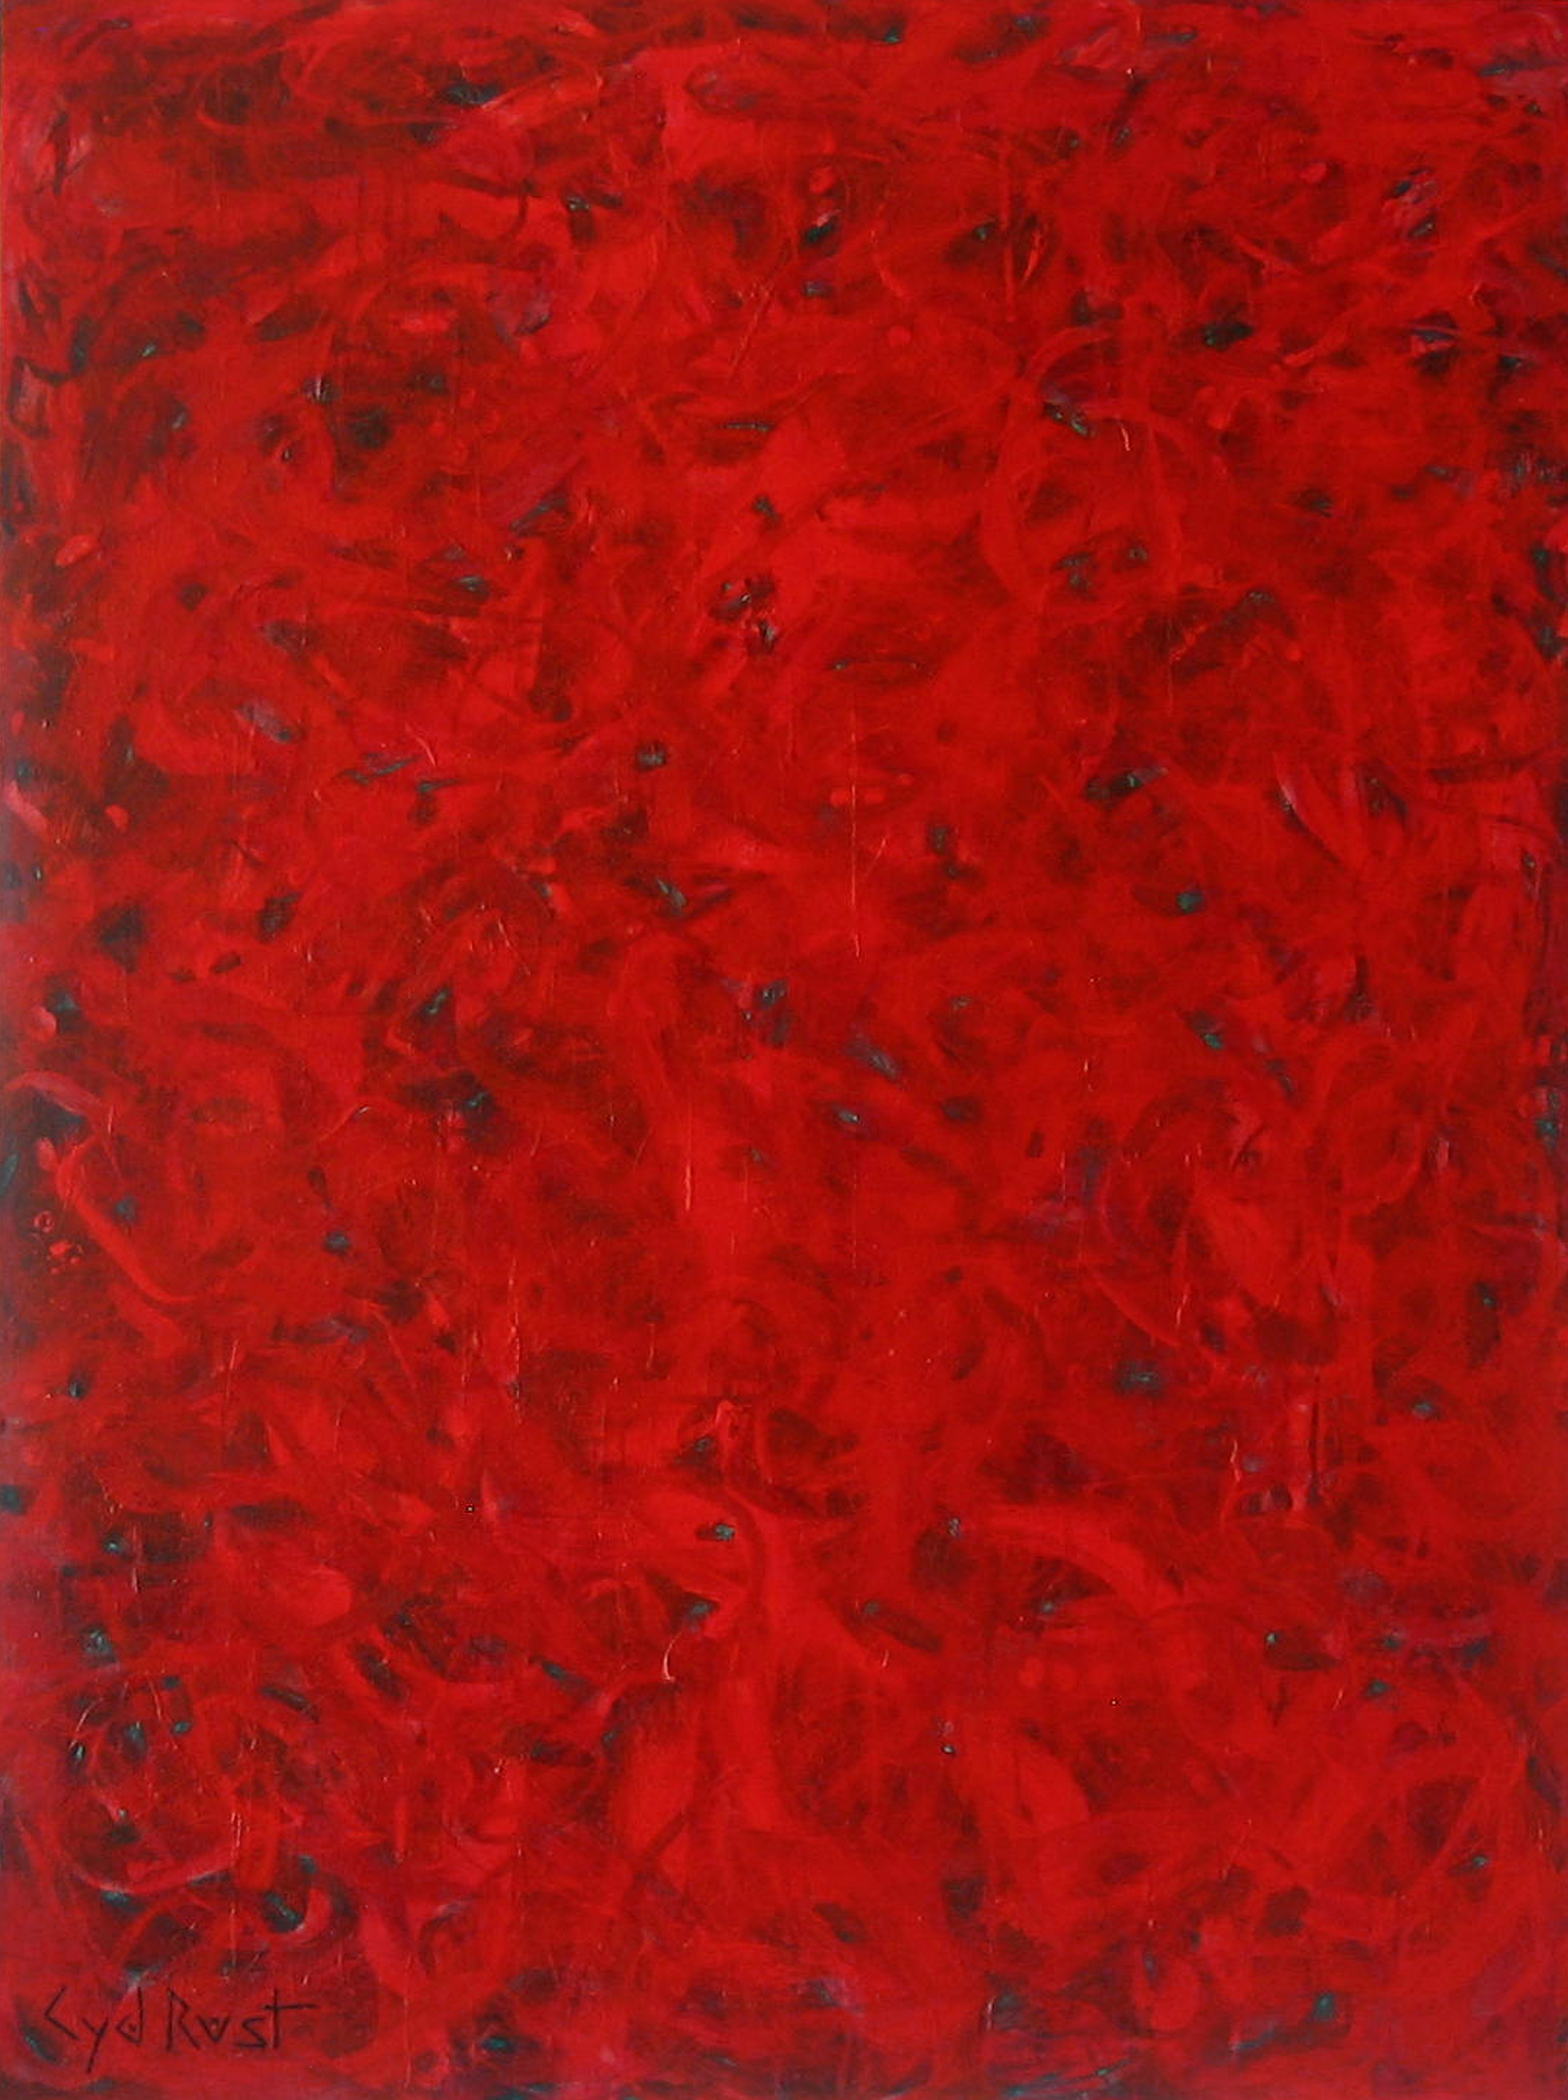 MESMERIZE ©Cyd Rust: 30" x 40" Acrylic Painting on Gallery Wrapped Canvas